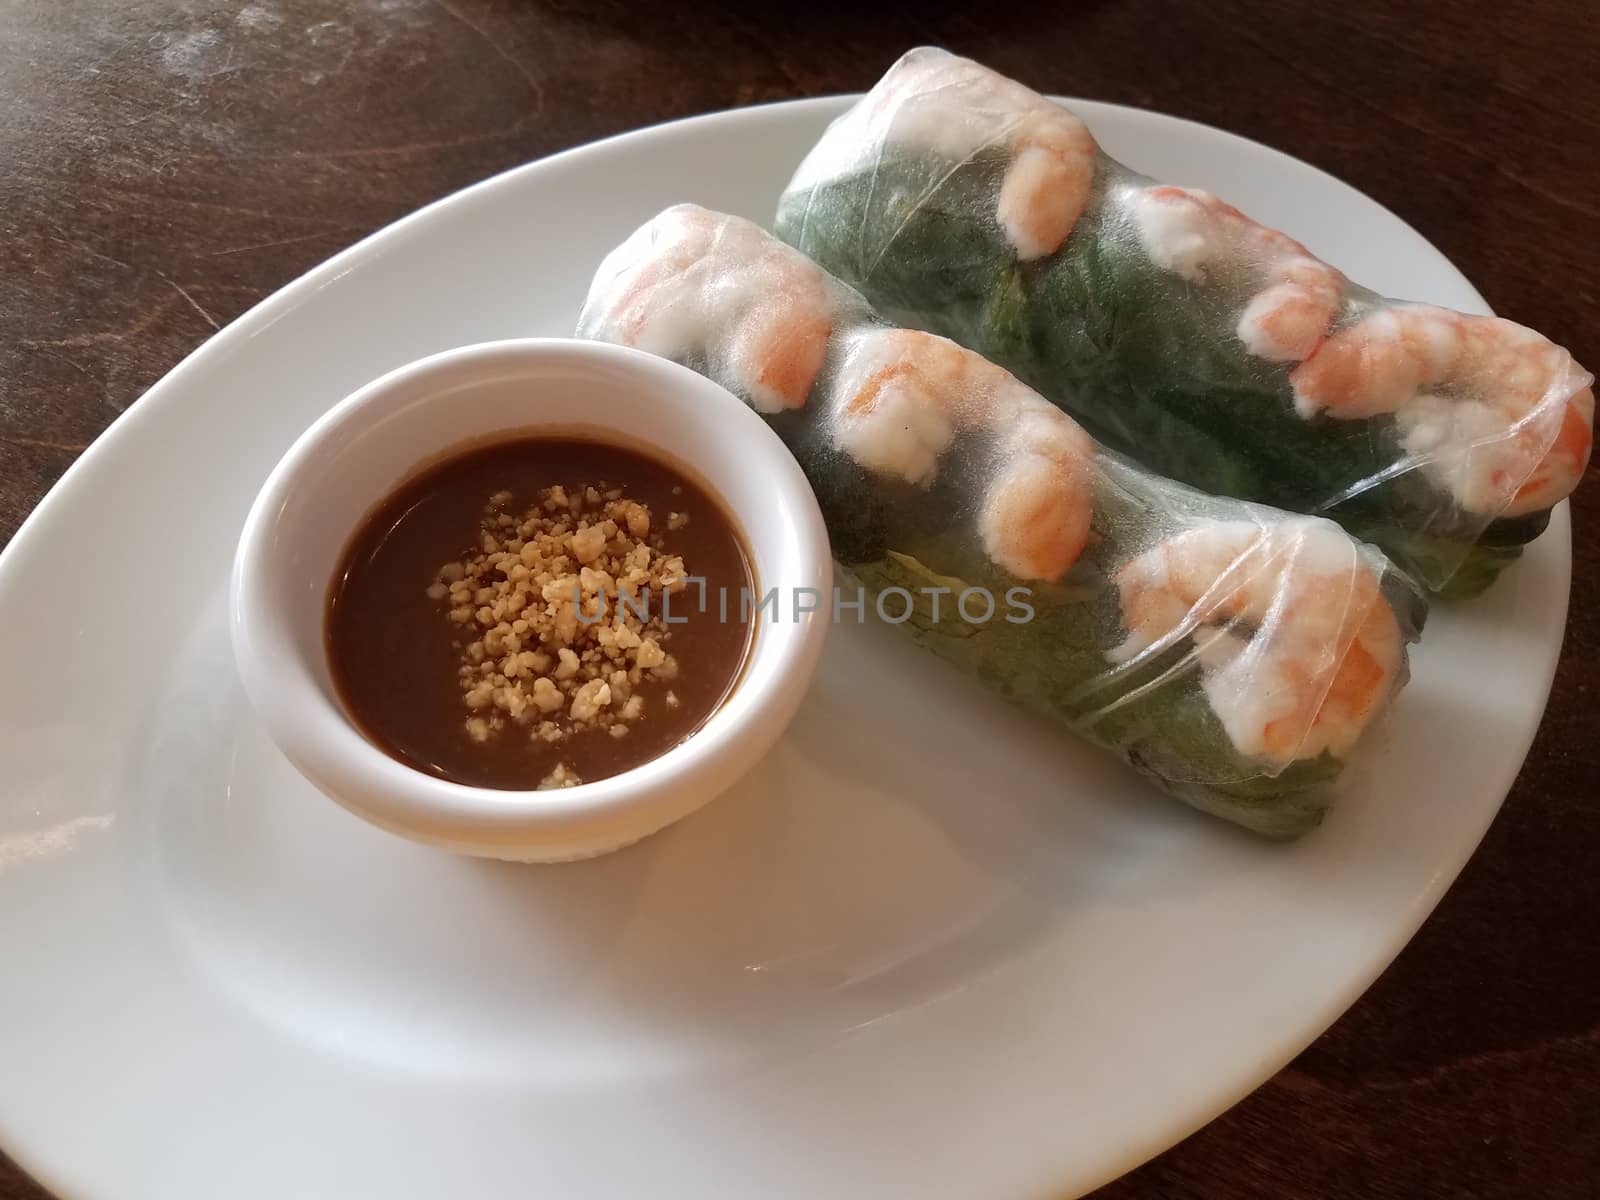 Vietnamese rice paper rolls with shrimp and peanut dipping sauce